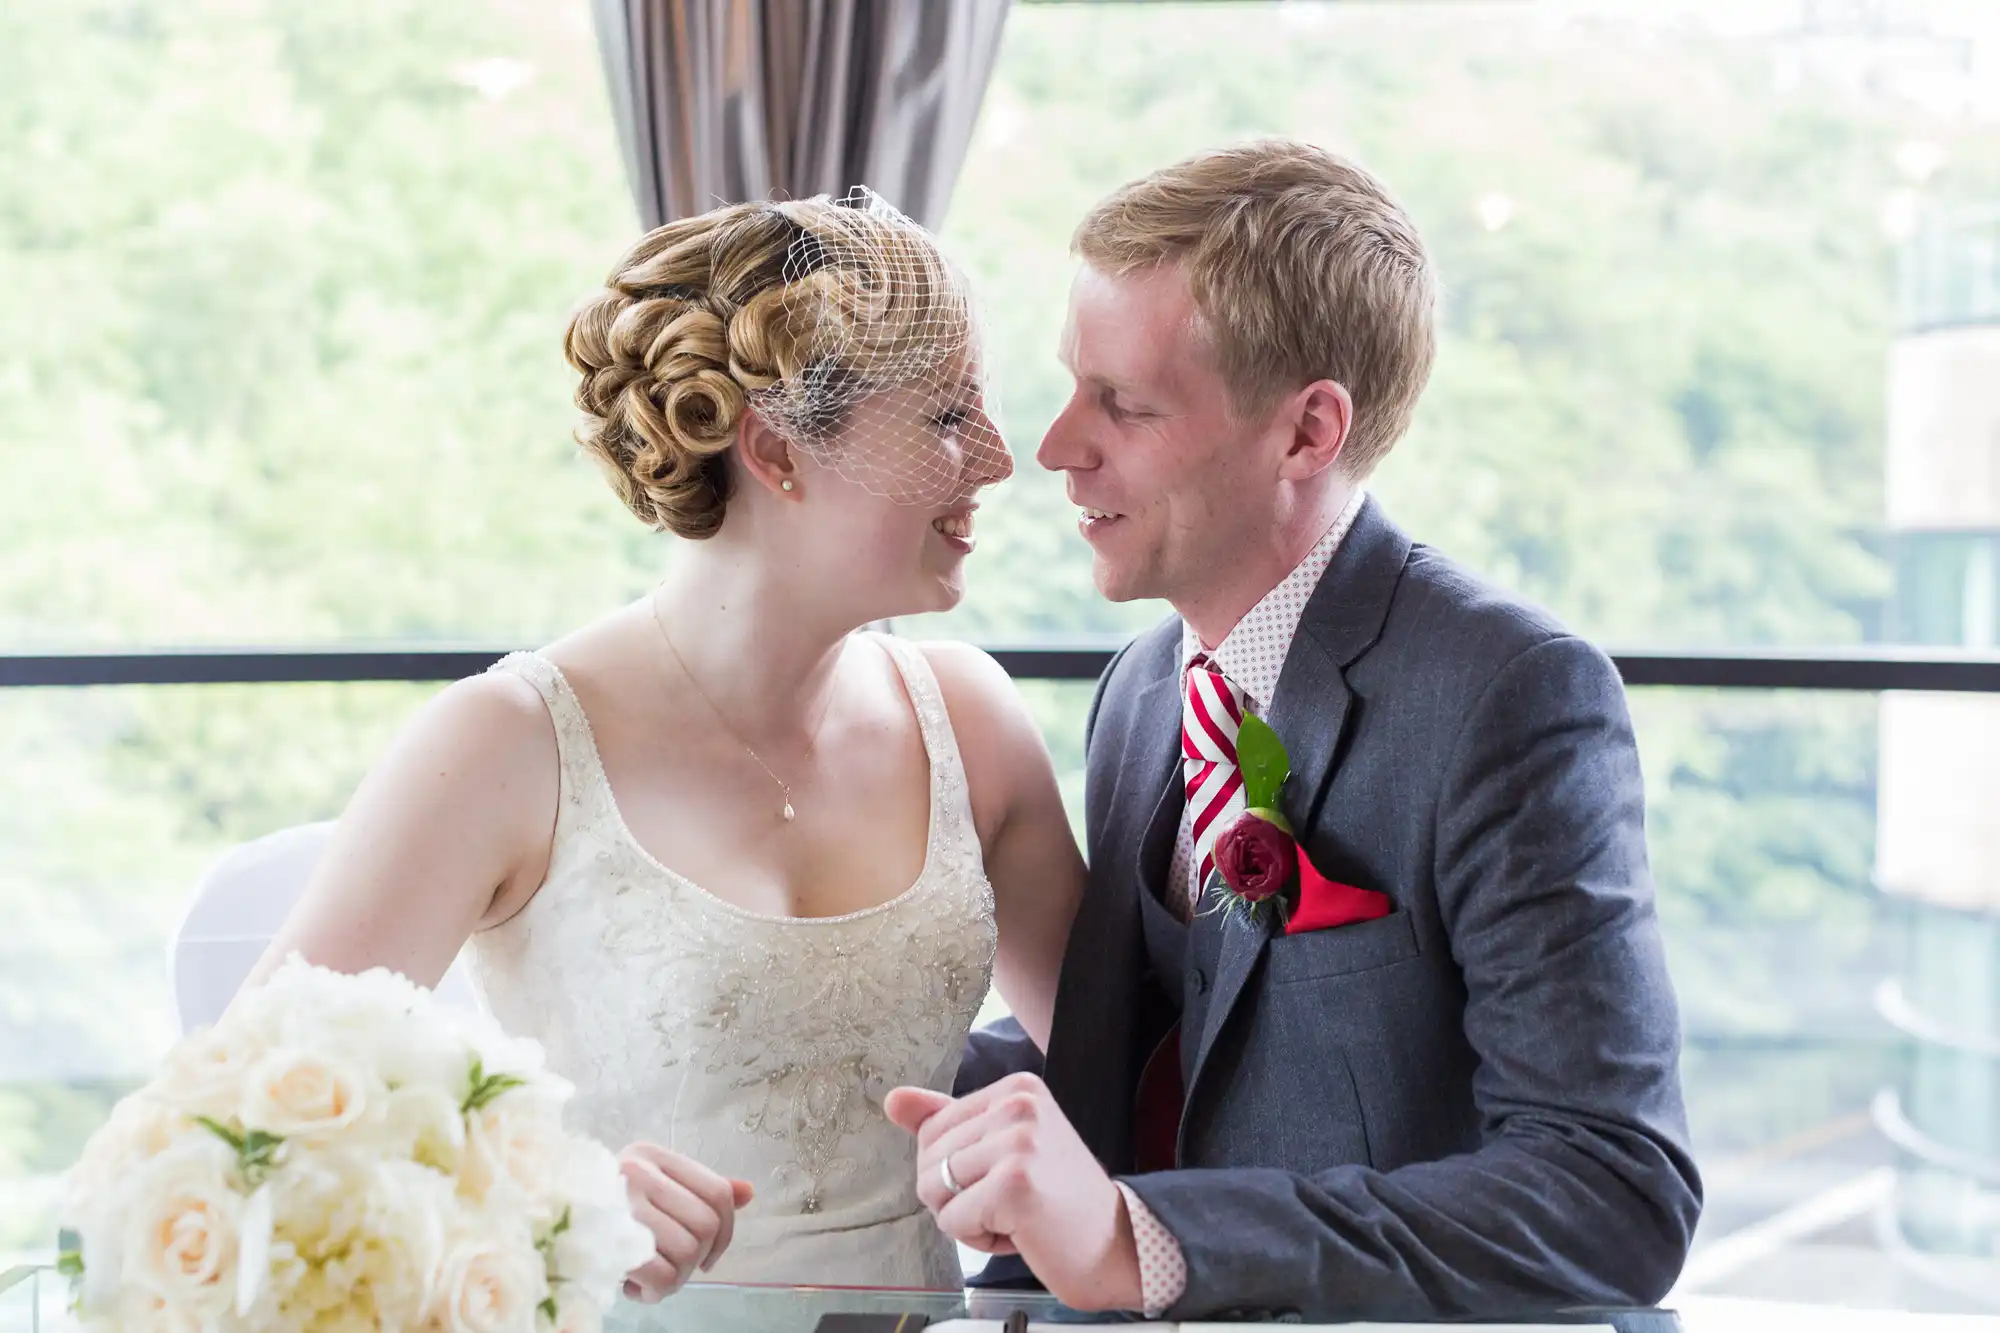 A bride and groom smiling and gazing at each other, with the bride wearing a veil and the groom a red rose boutonniere, indoors by a window.